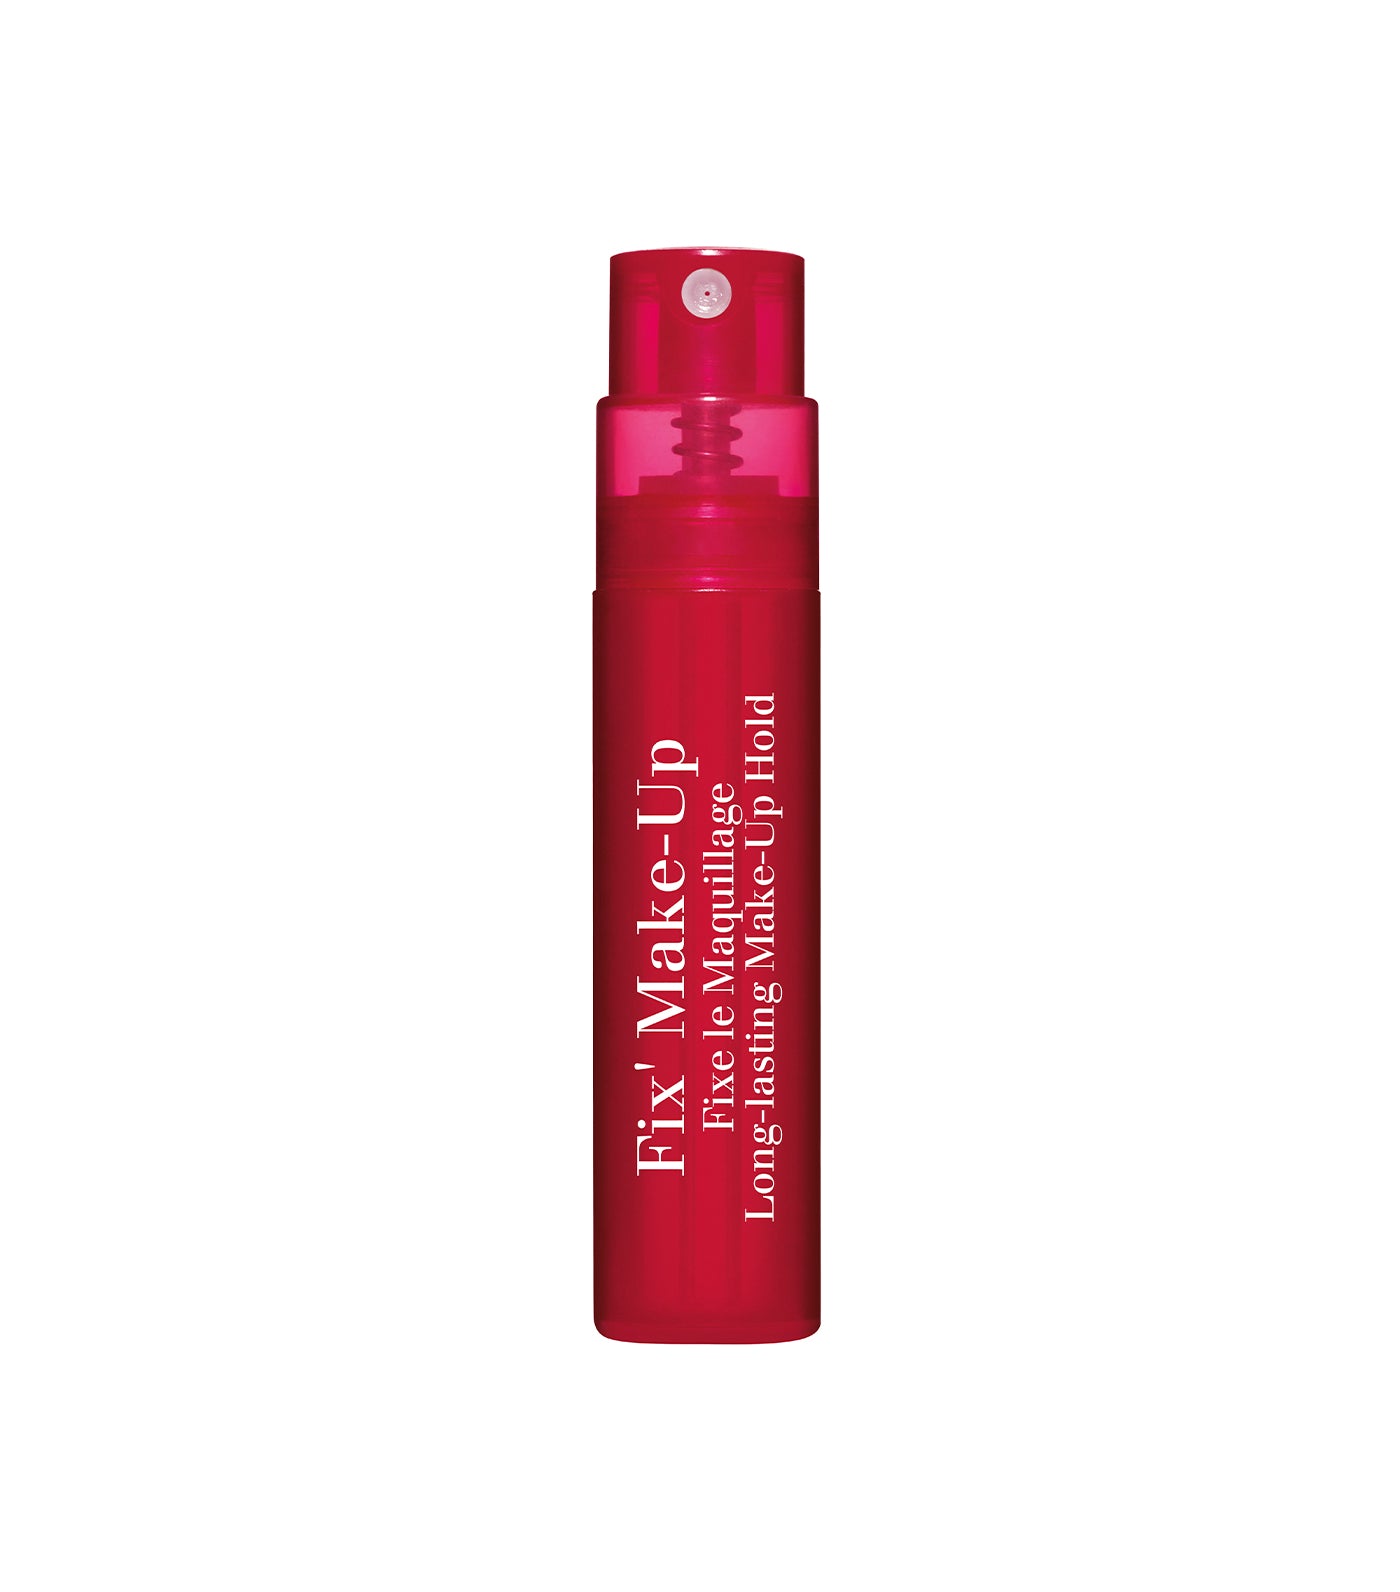 Clarins Complimentary Mini Fix' Make-Up Spray